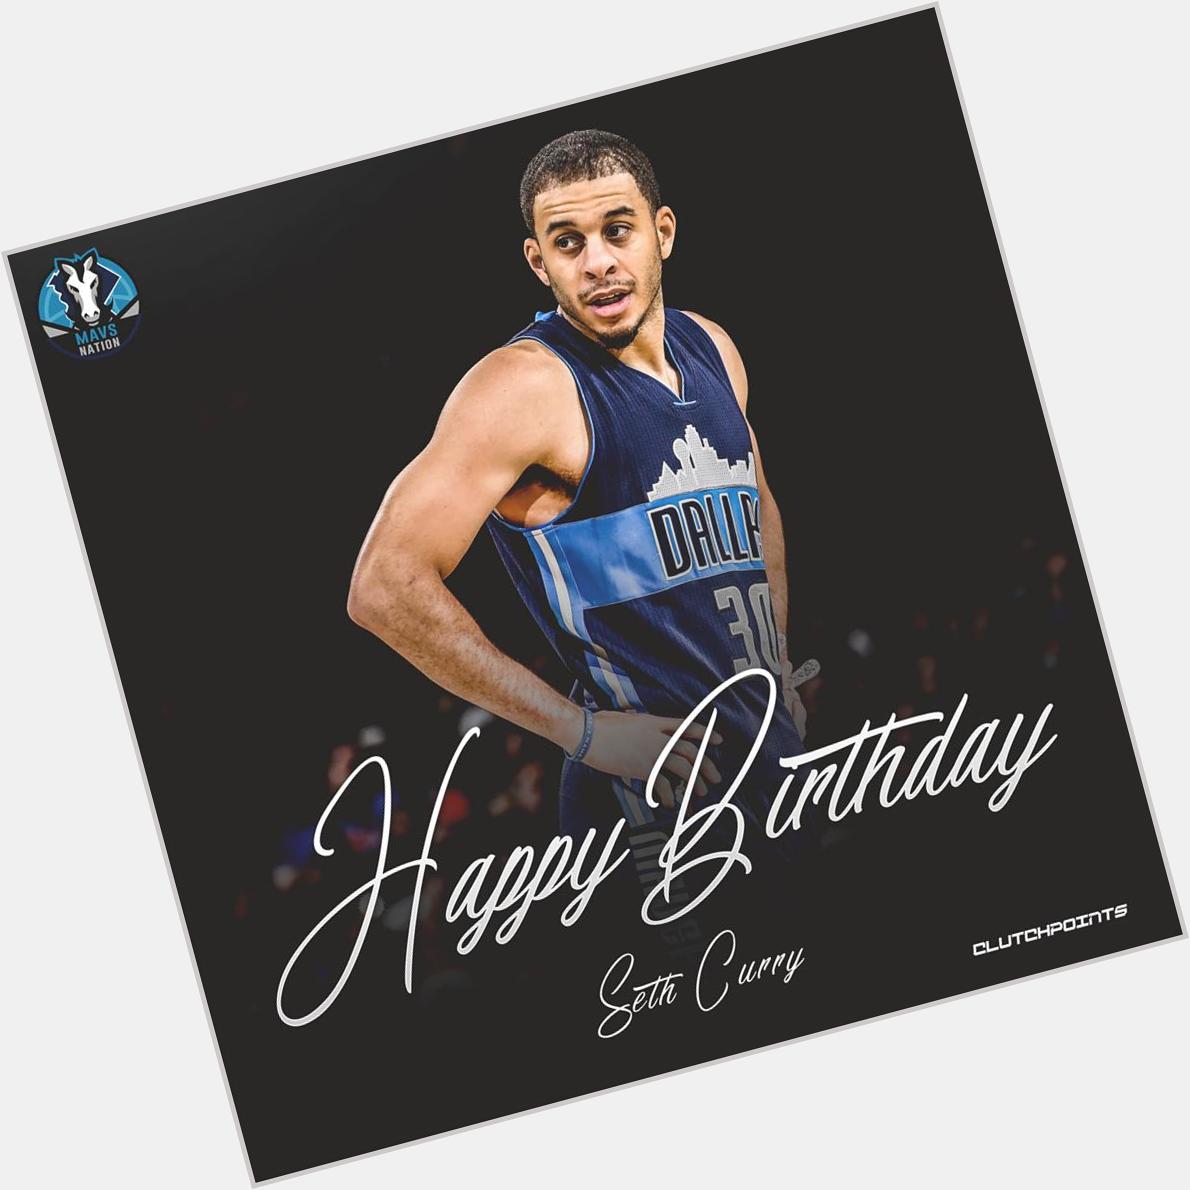  Nation, let\s all wish Seth Curry a happy 29th birthday!  